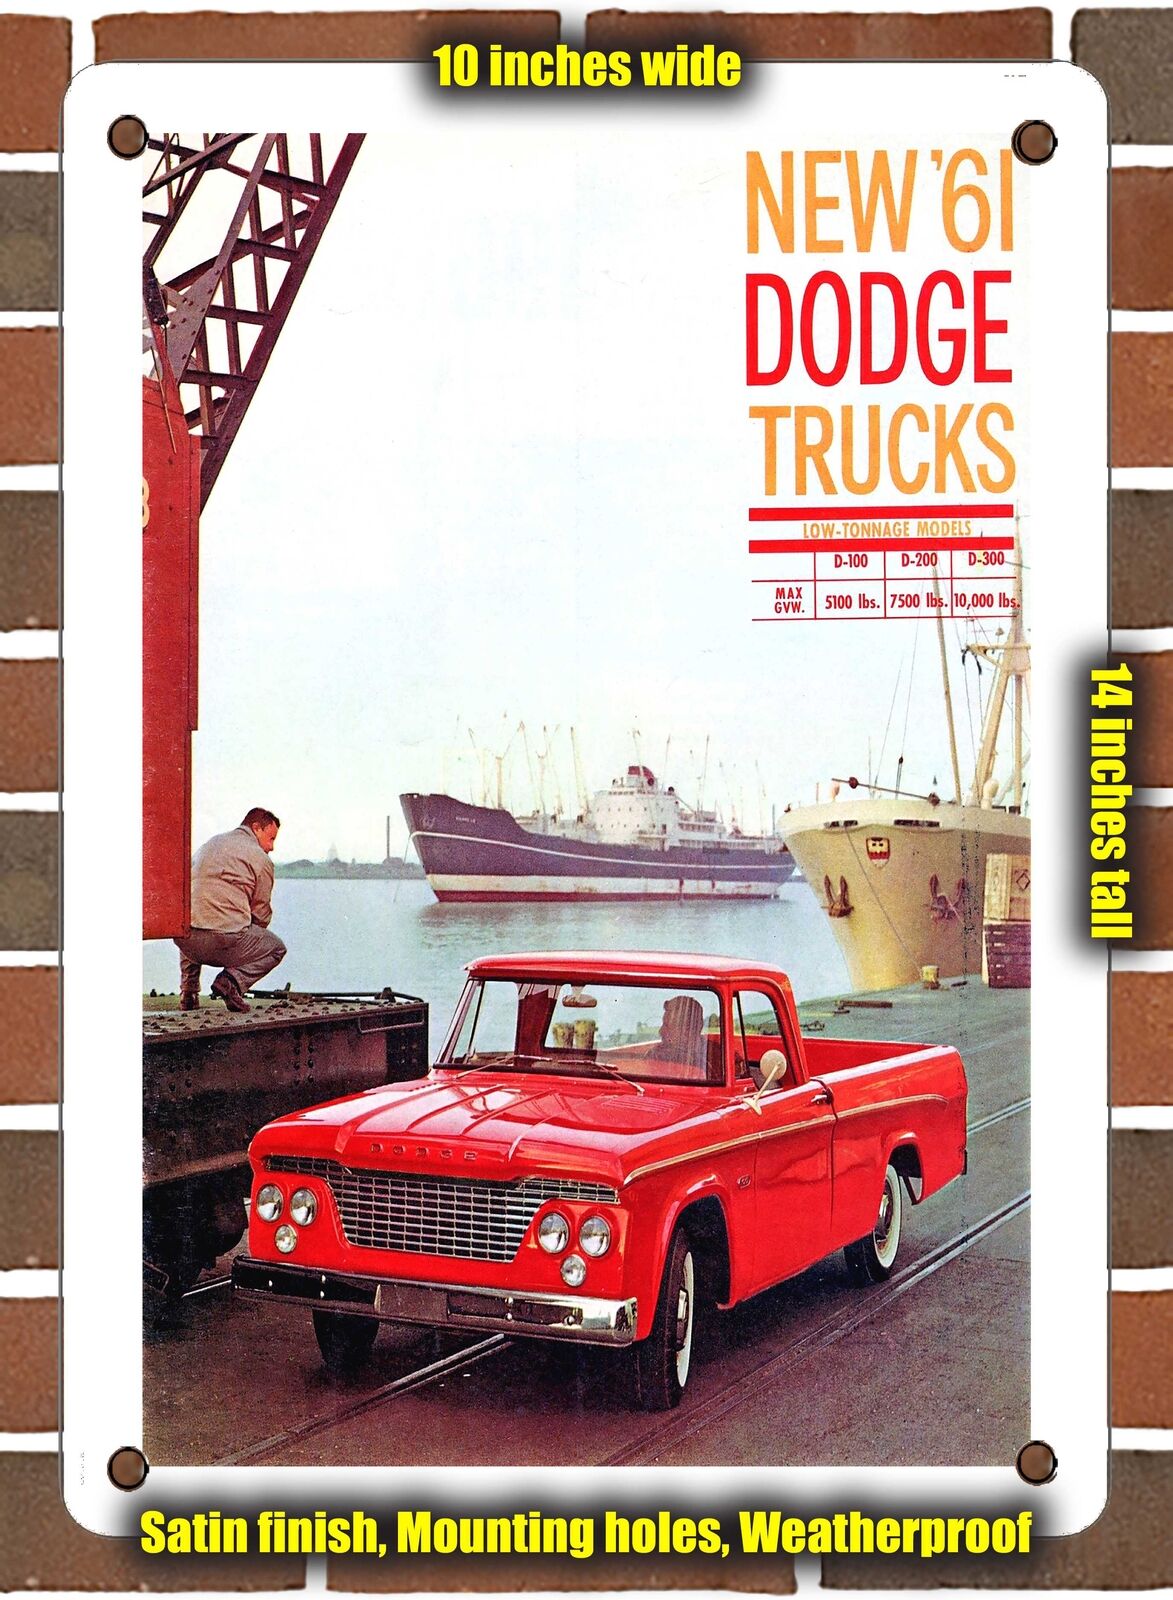 METAL SIGN - 1961 Dodge Sweptline Pick Up Truck - 10x14 Inches